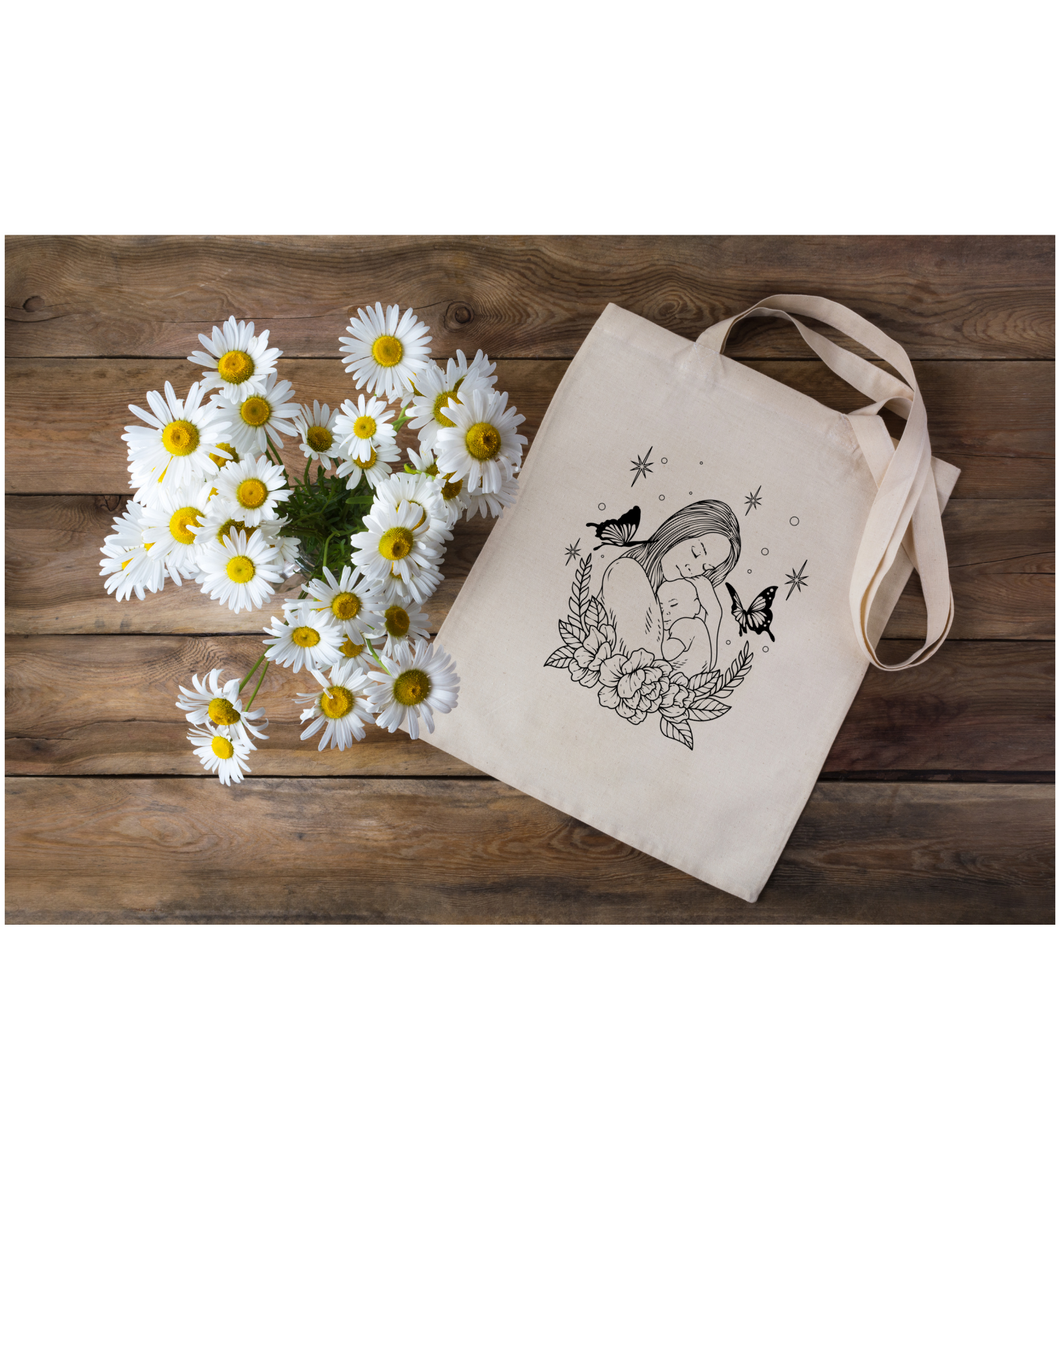 MOTHER tote bag